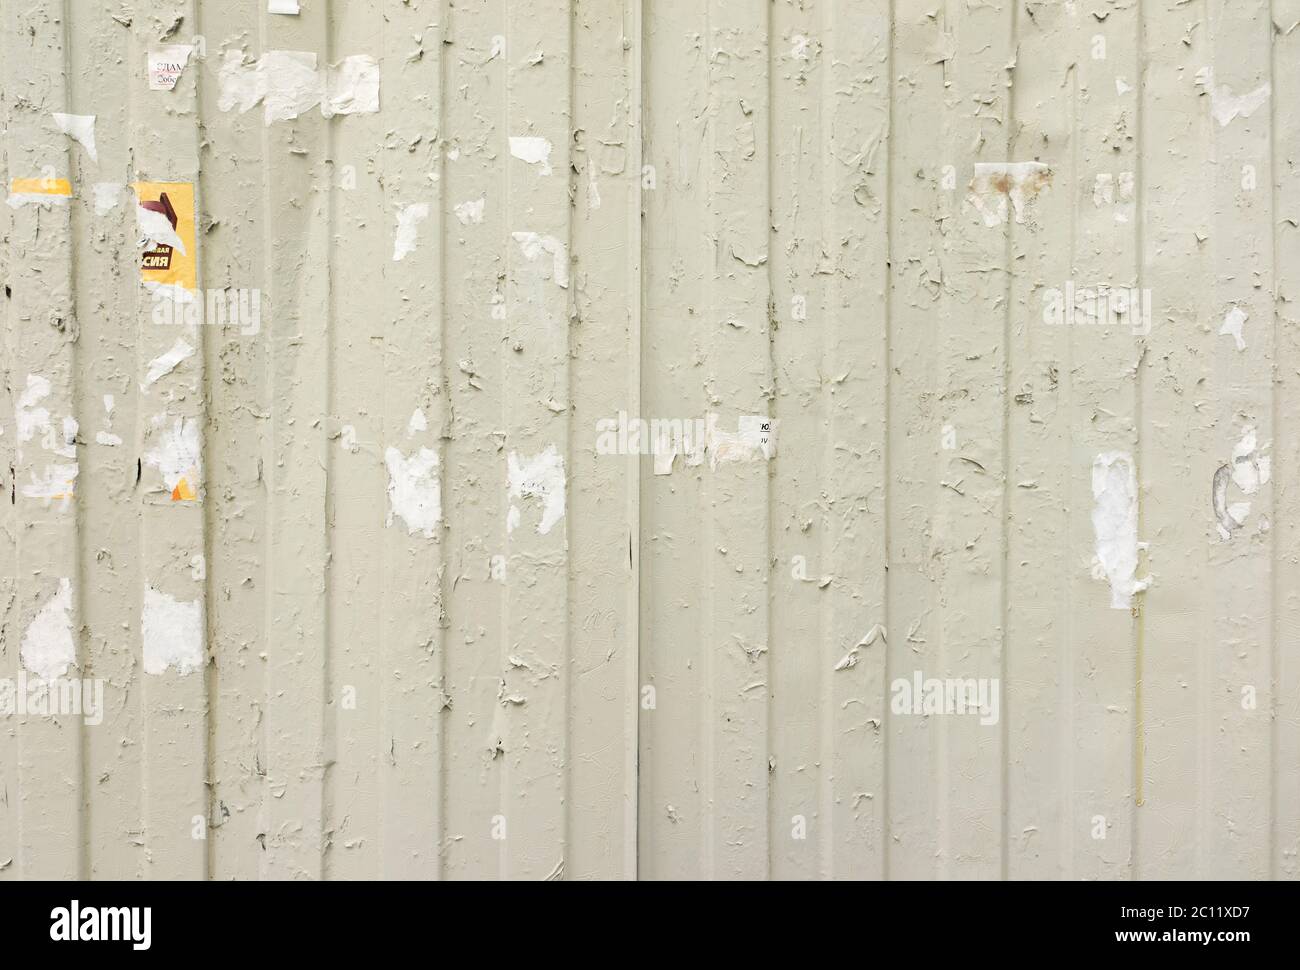 Torn Posters On Grunge Old Walls Stock Photo